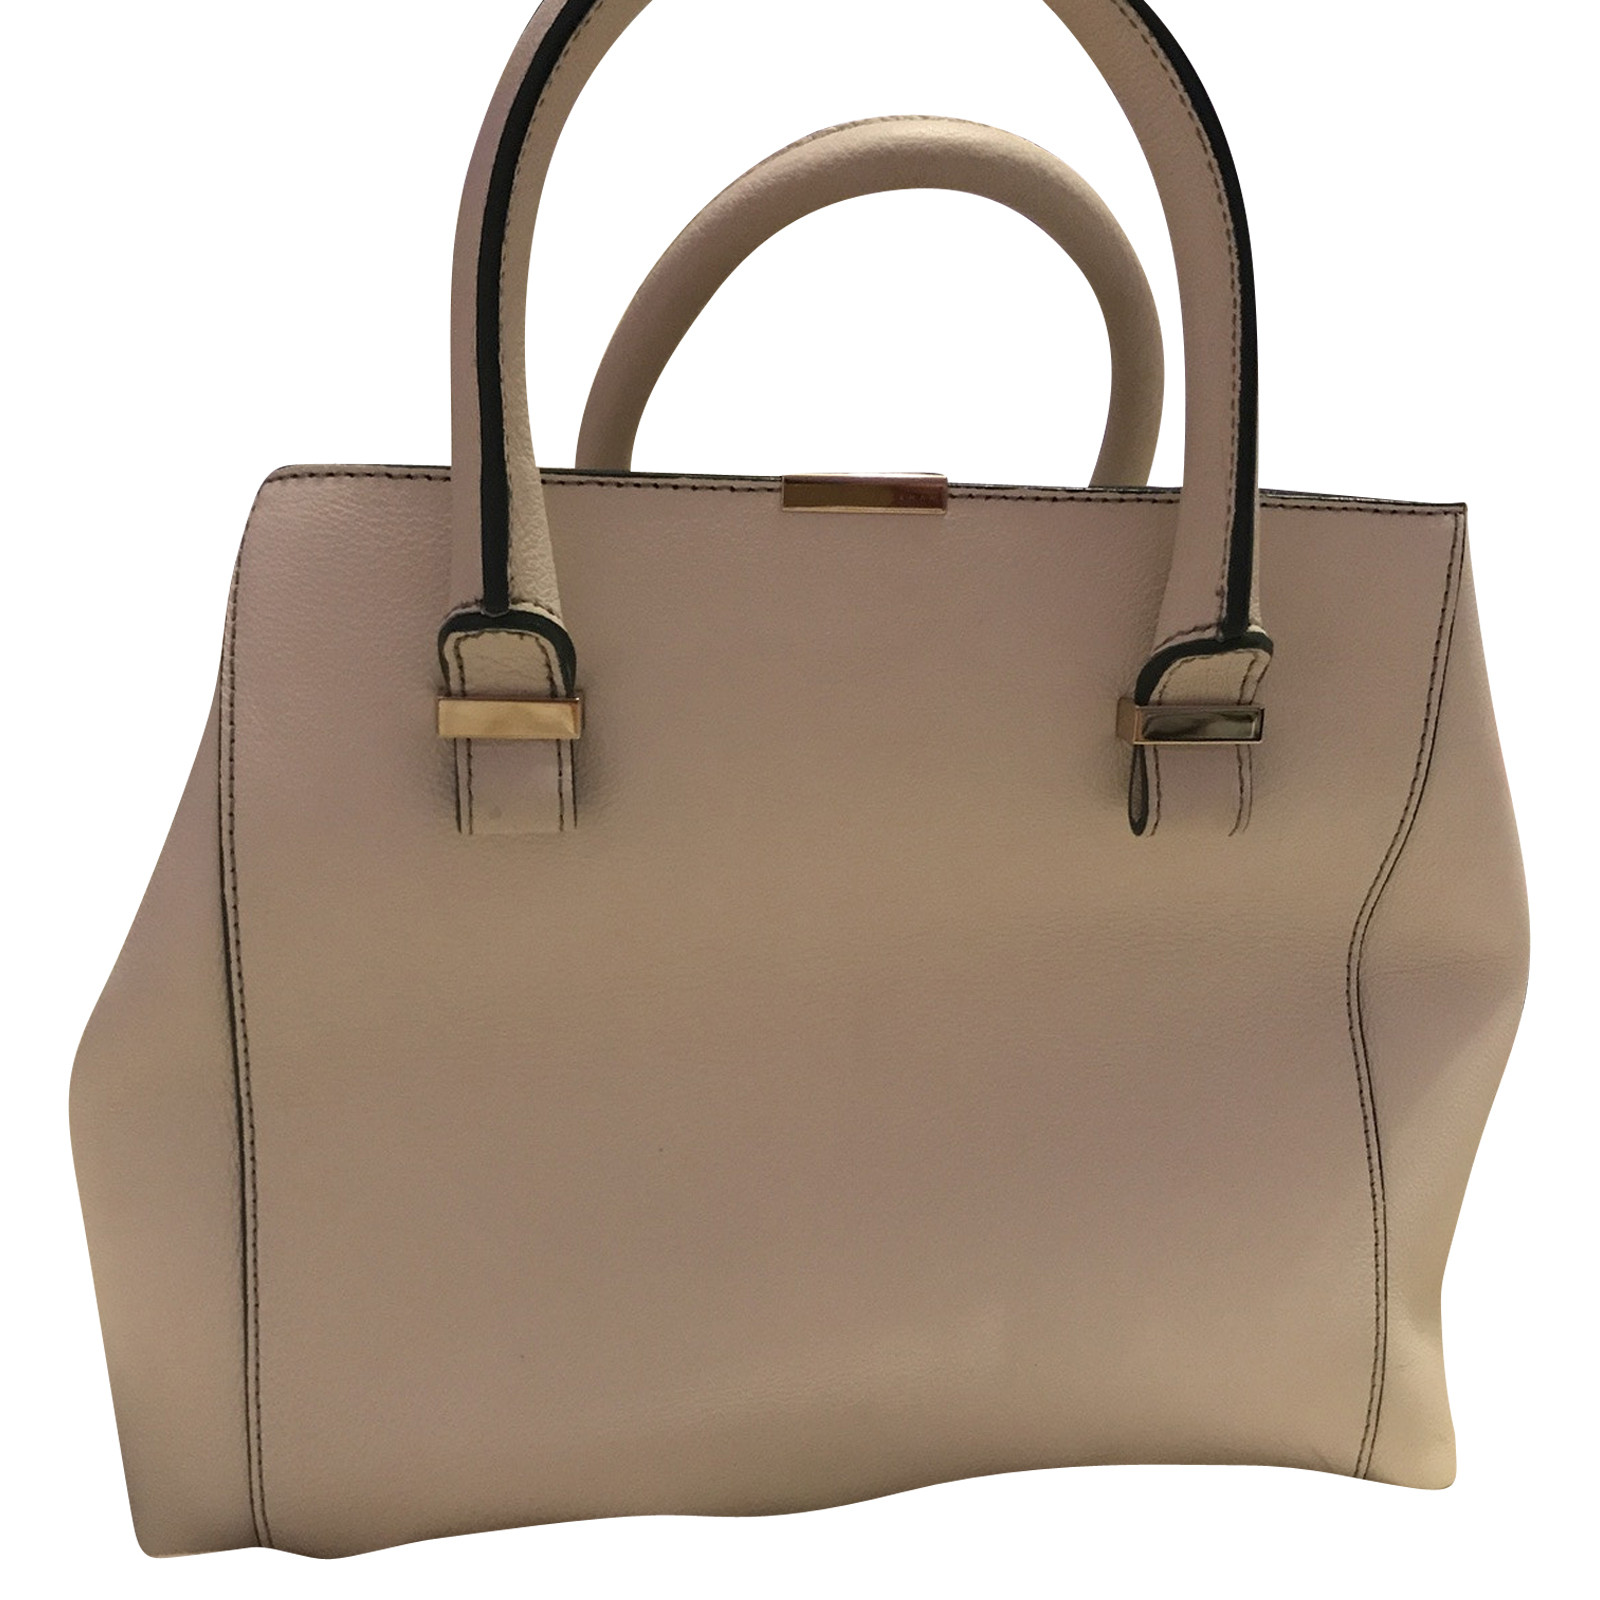 Victoria Beckham Tote bag Leather in White - Second Hand Victoria Beckham  Tote bag Leather in White buy used for 599€ (4406618)